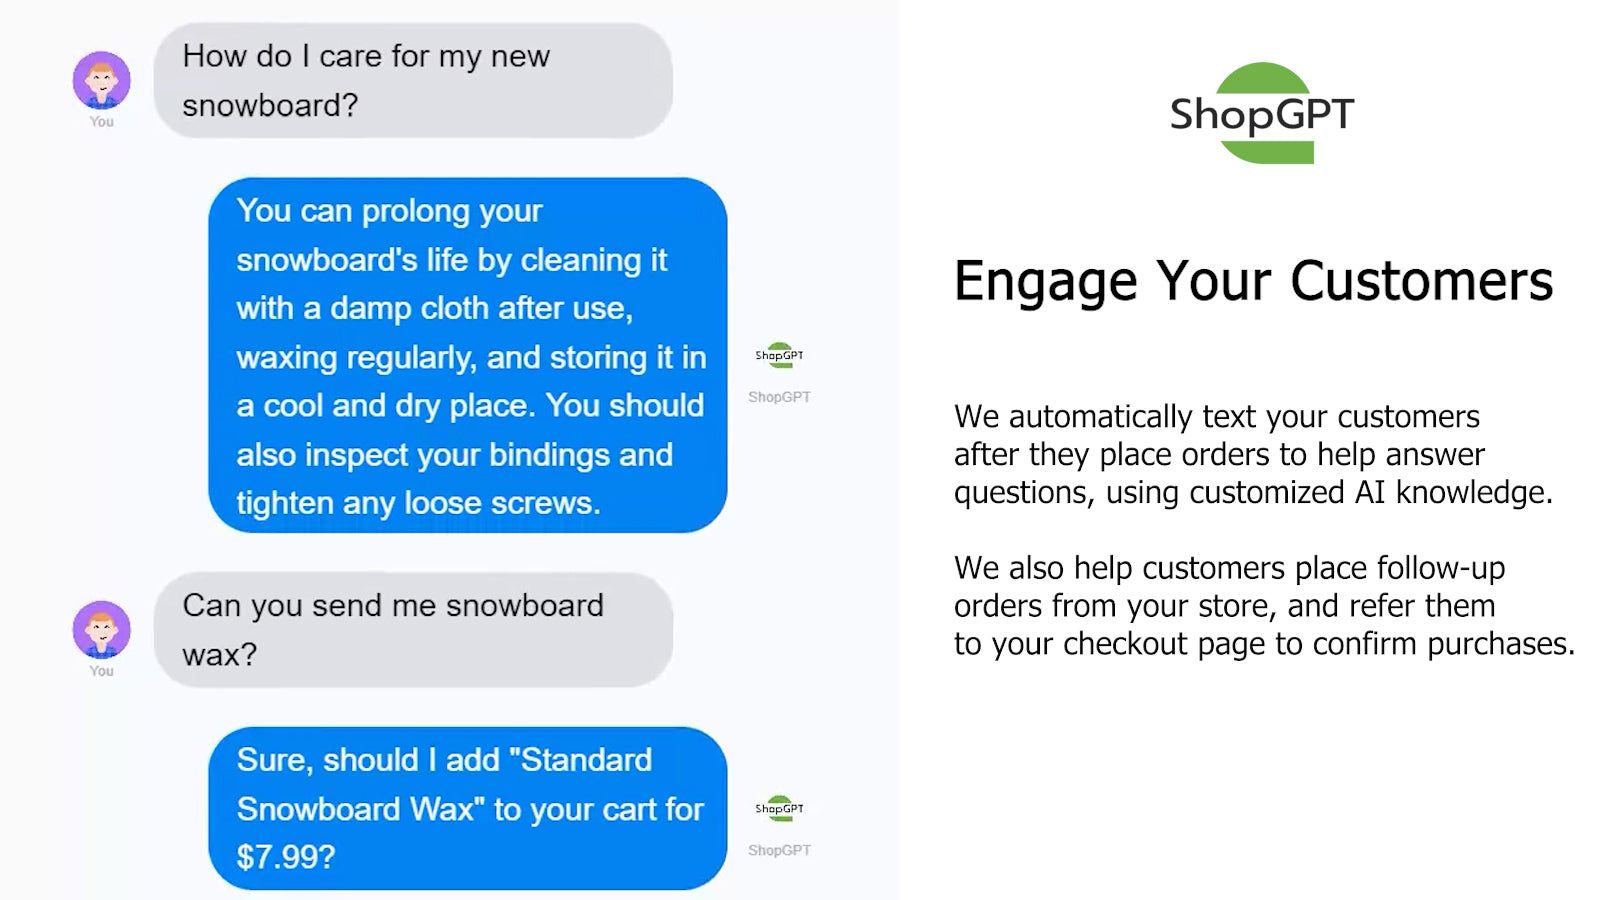 Engage customers with AI customer support